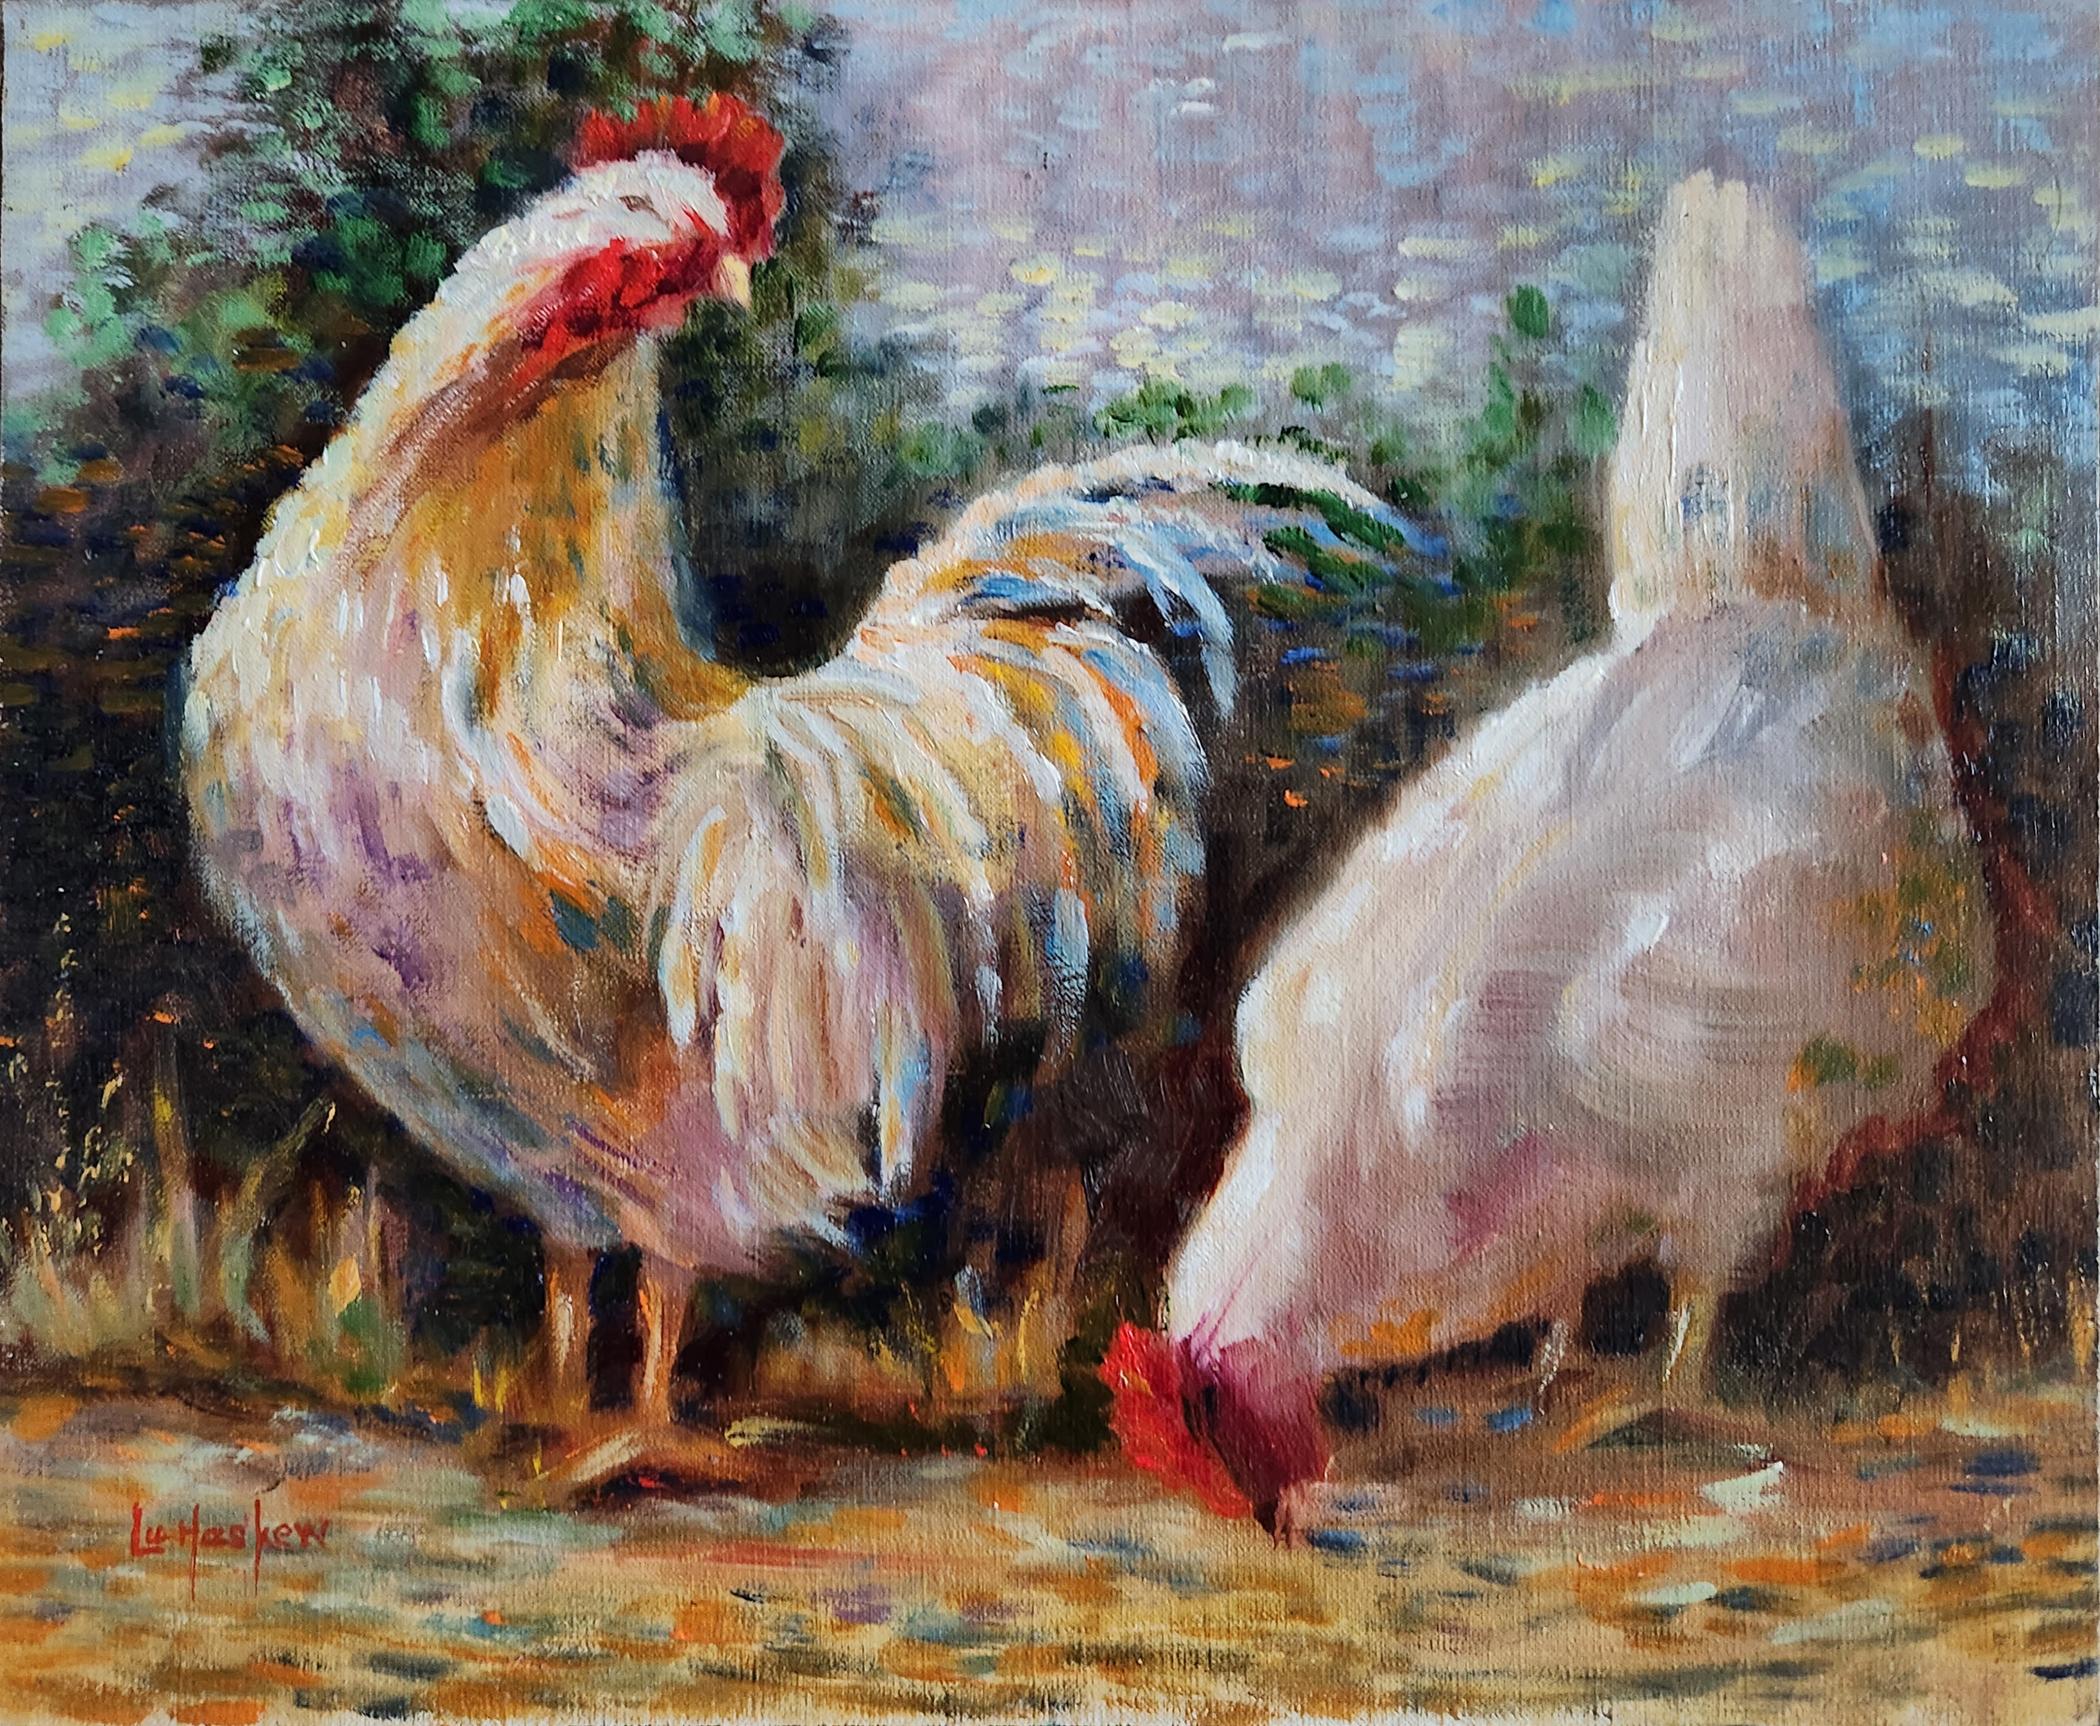 Pair of Chickens, 10x12" oil on board - Painting by Lu Haskew